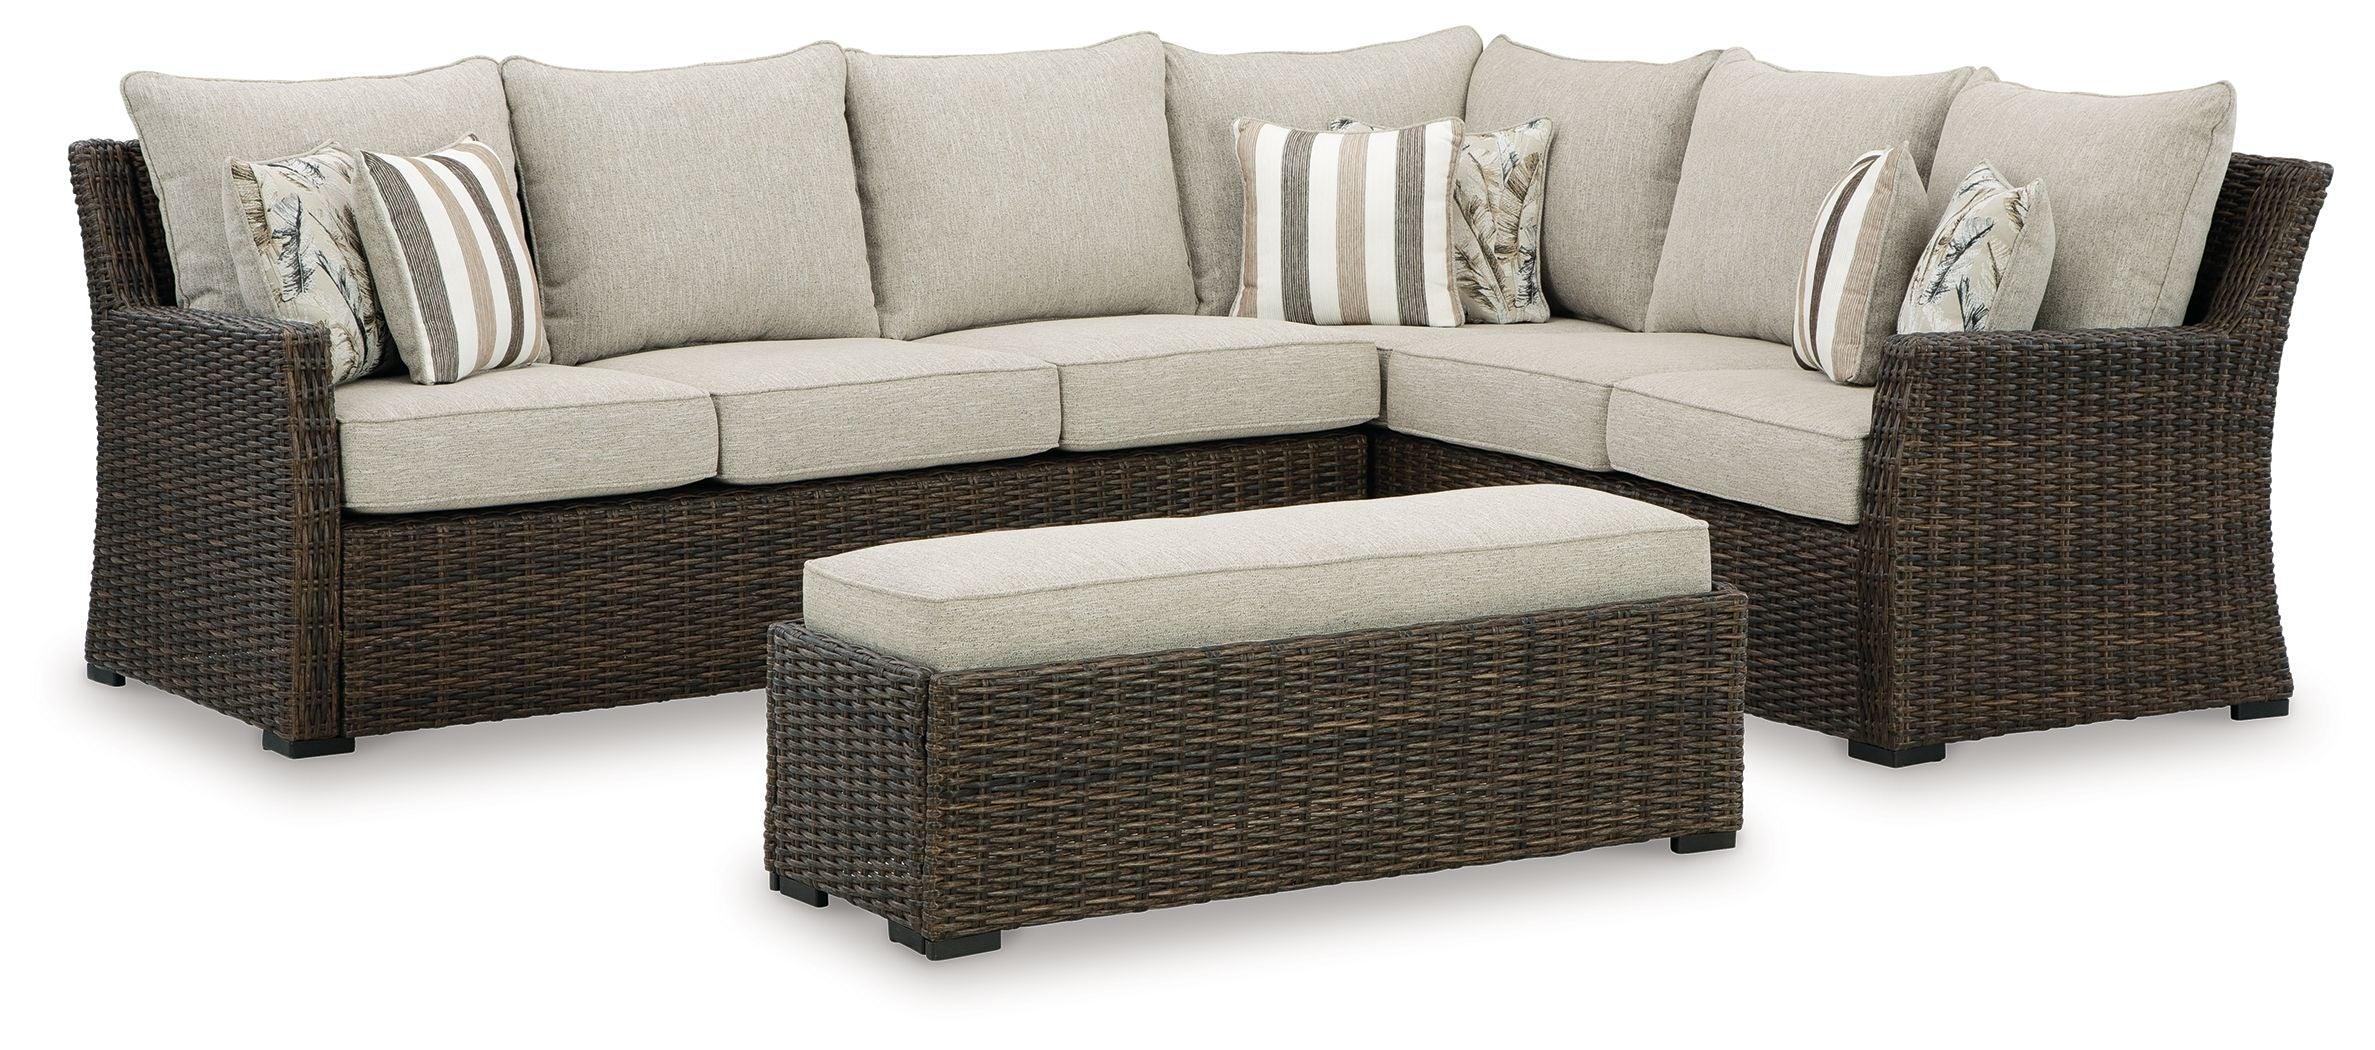 Signature Design by Ashley® - Brook Ranch - Brown - Sofa Sectional, Bench With Cushion (Set of 3) - 5th Avenue Furniture